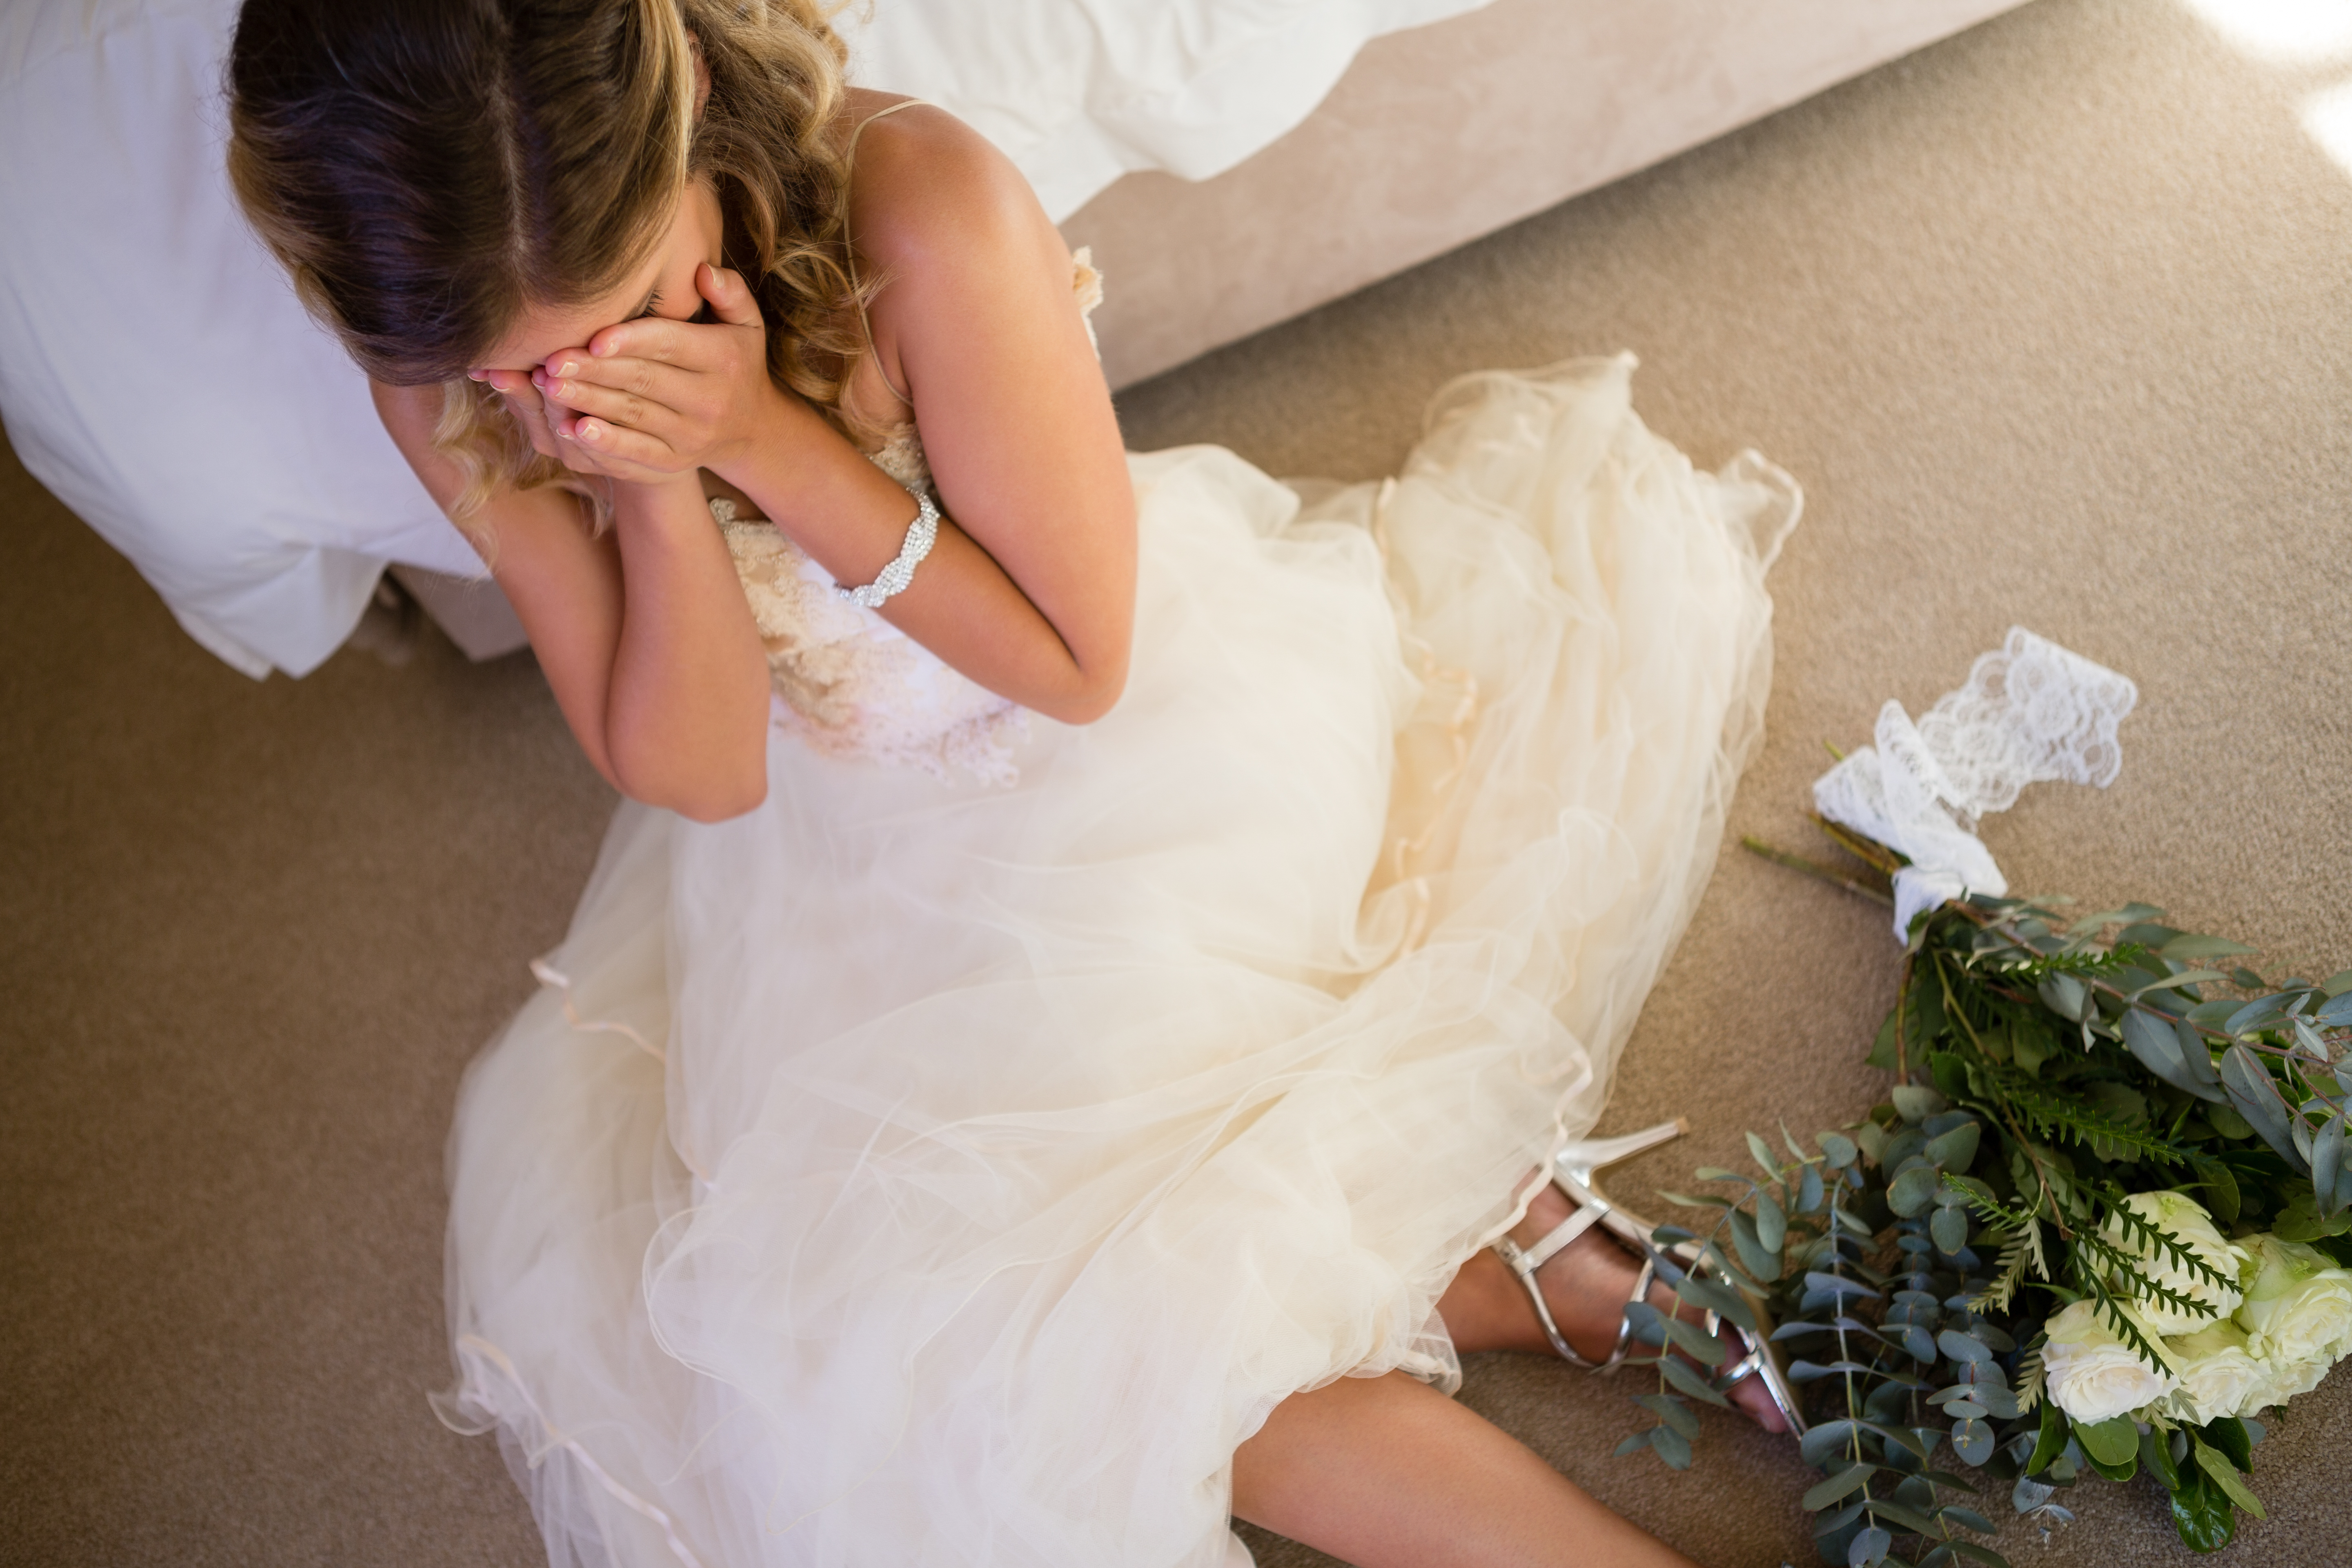 A woman crying on her wedding day | Source: Shutterstock